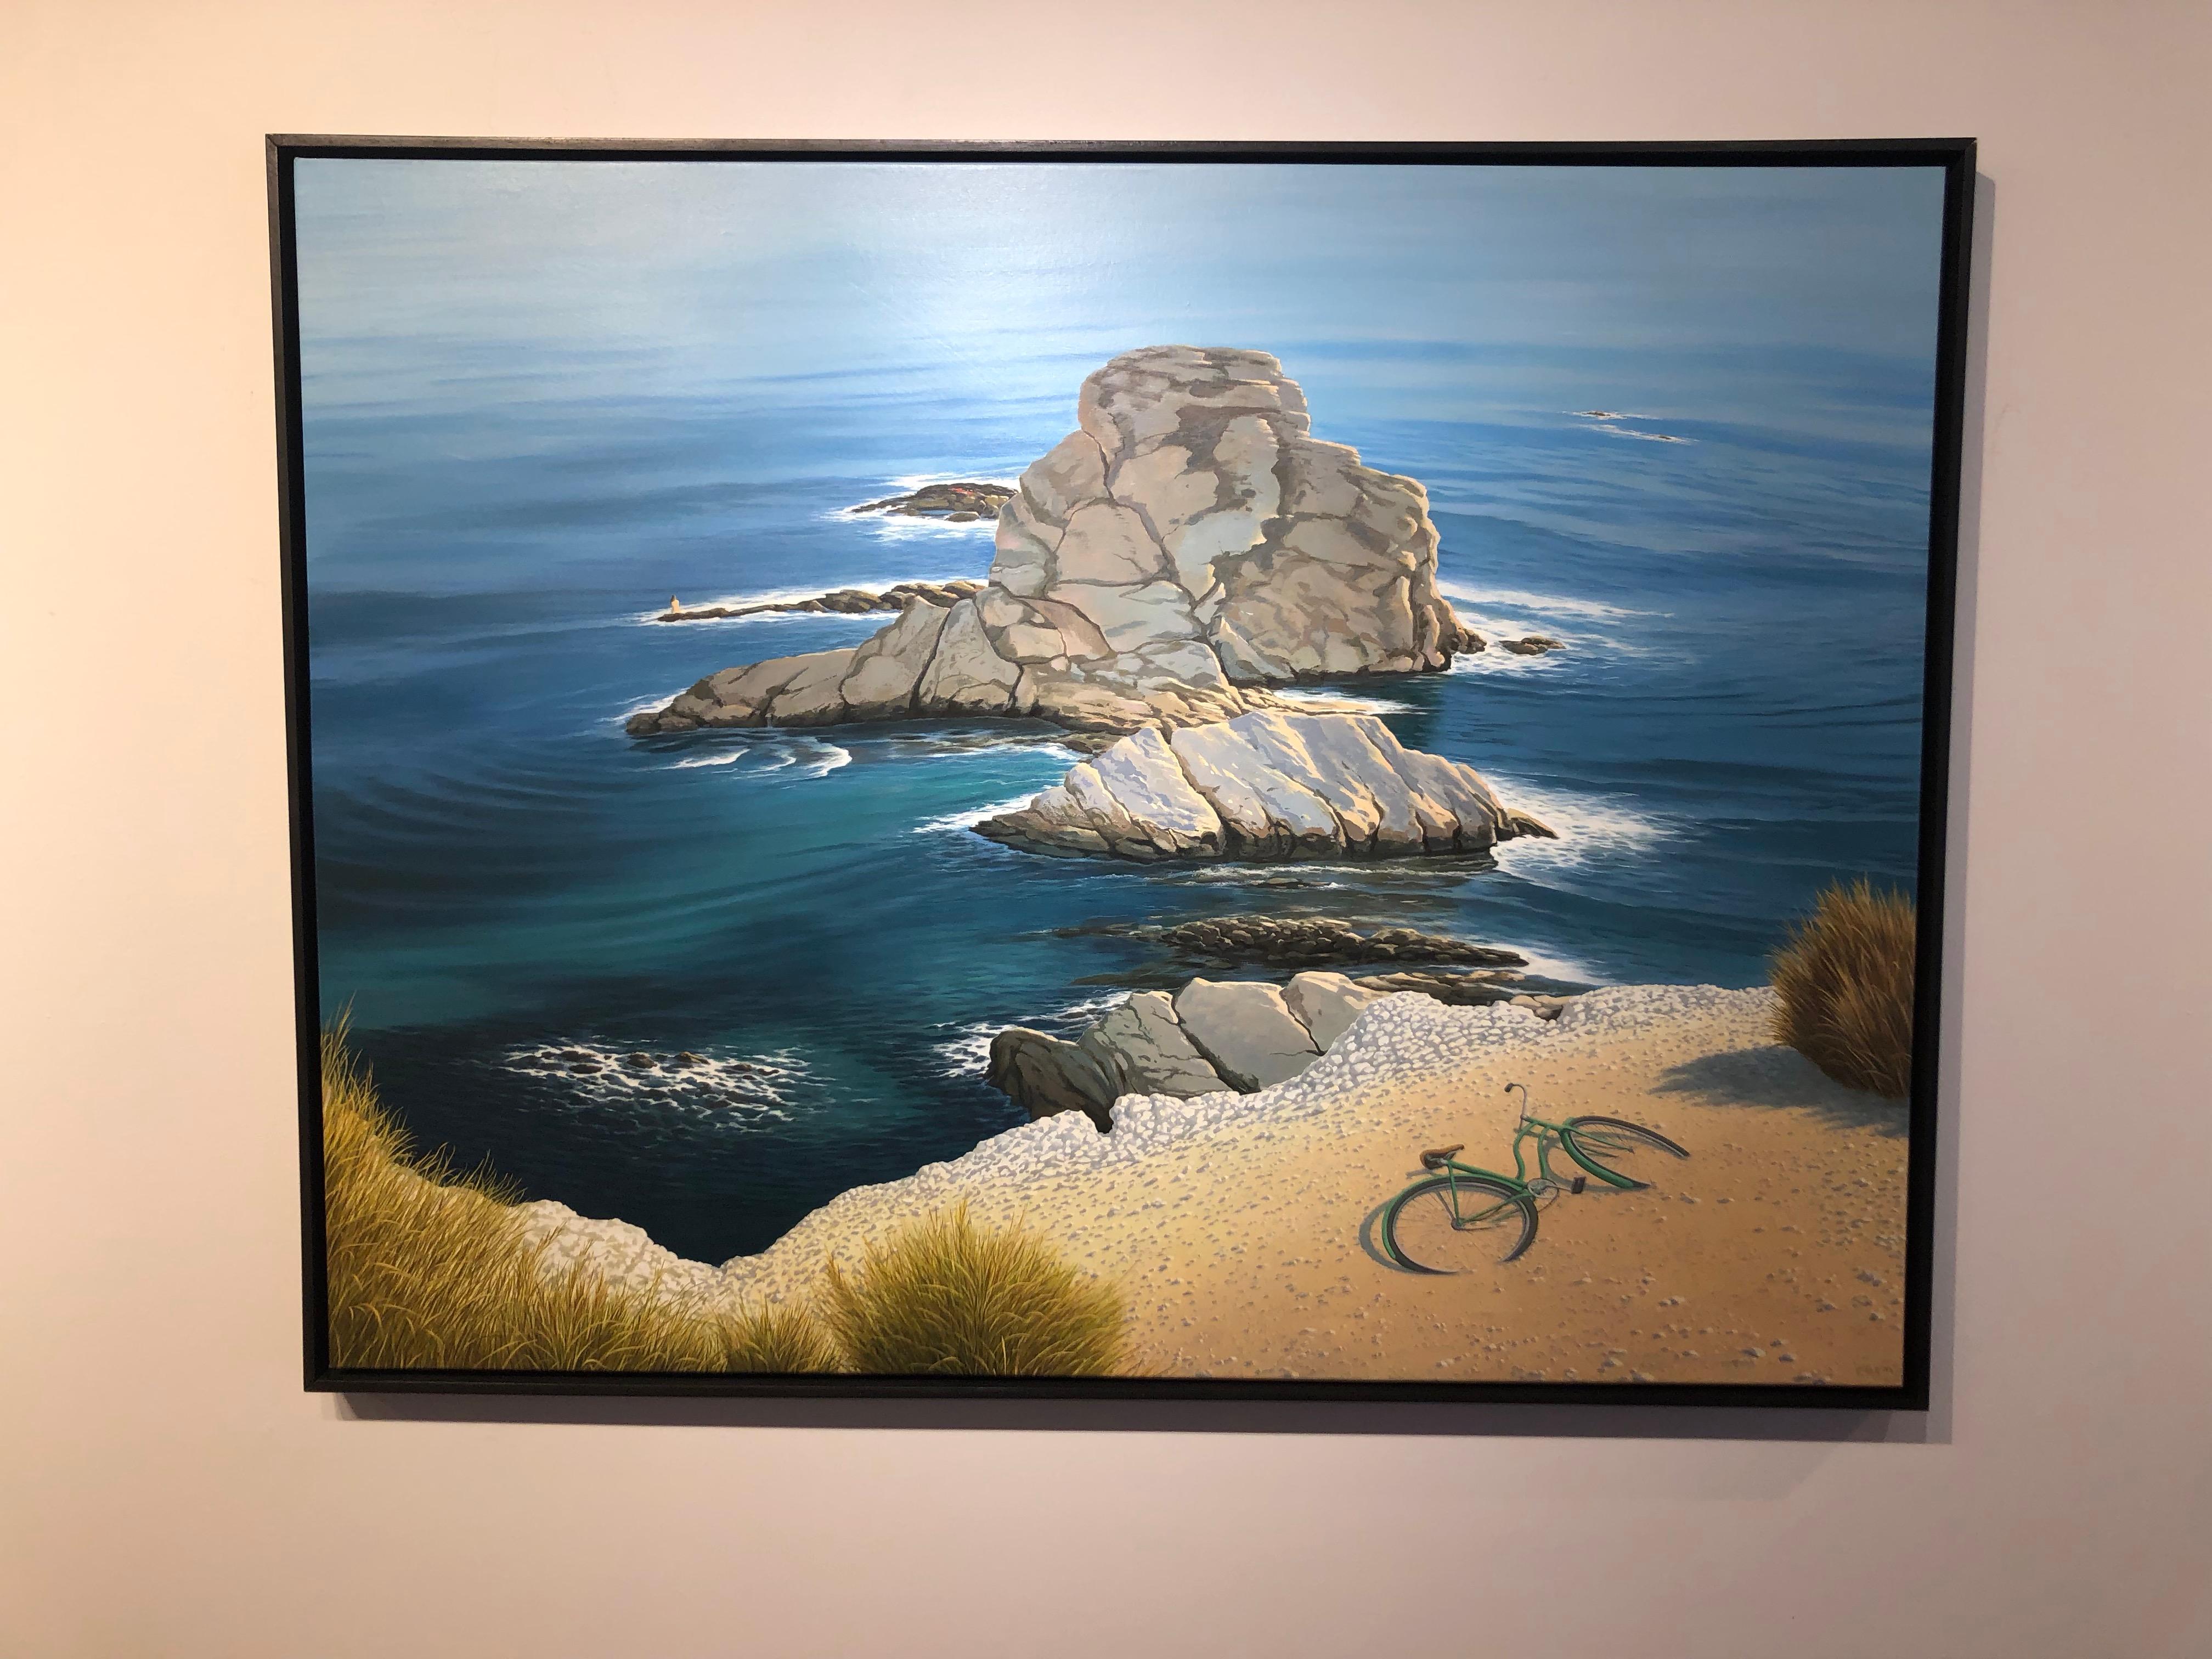 Evocation - Ocean Cliffside Scene Bathed in Warm Light and Blue Turquoise Water - Painting by René Monzón Relova “Pozas”